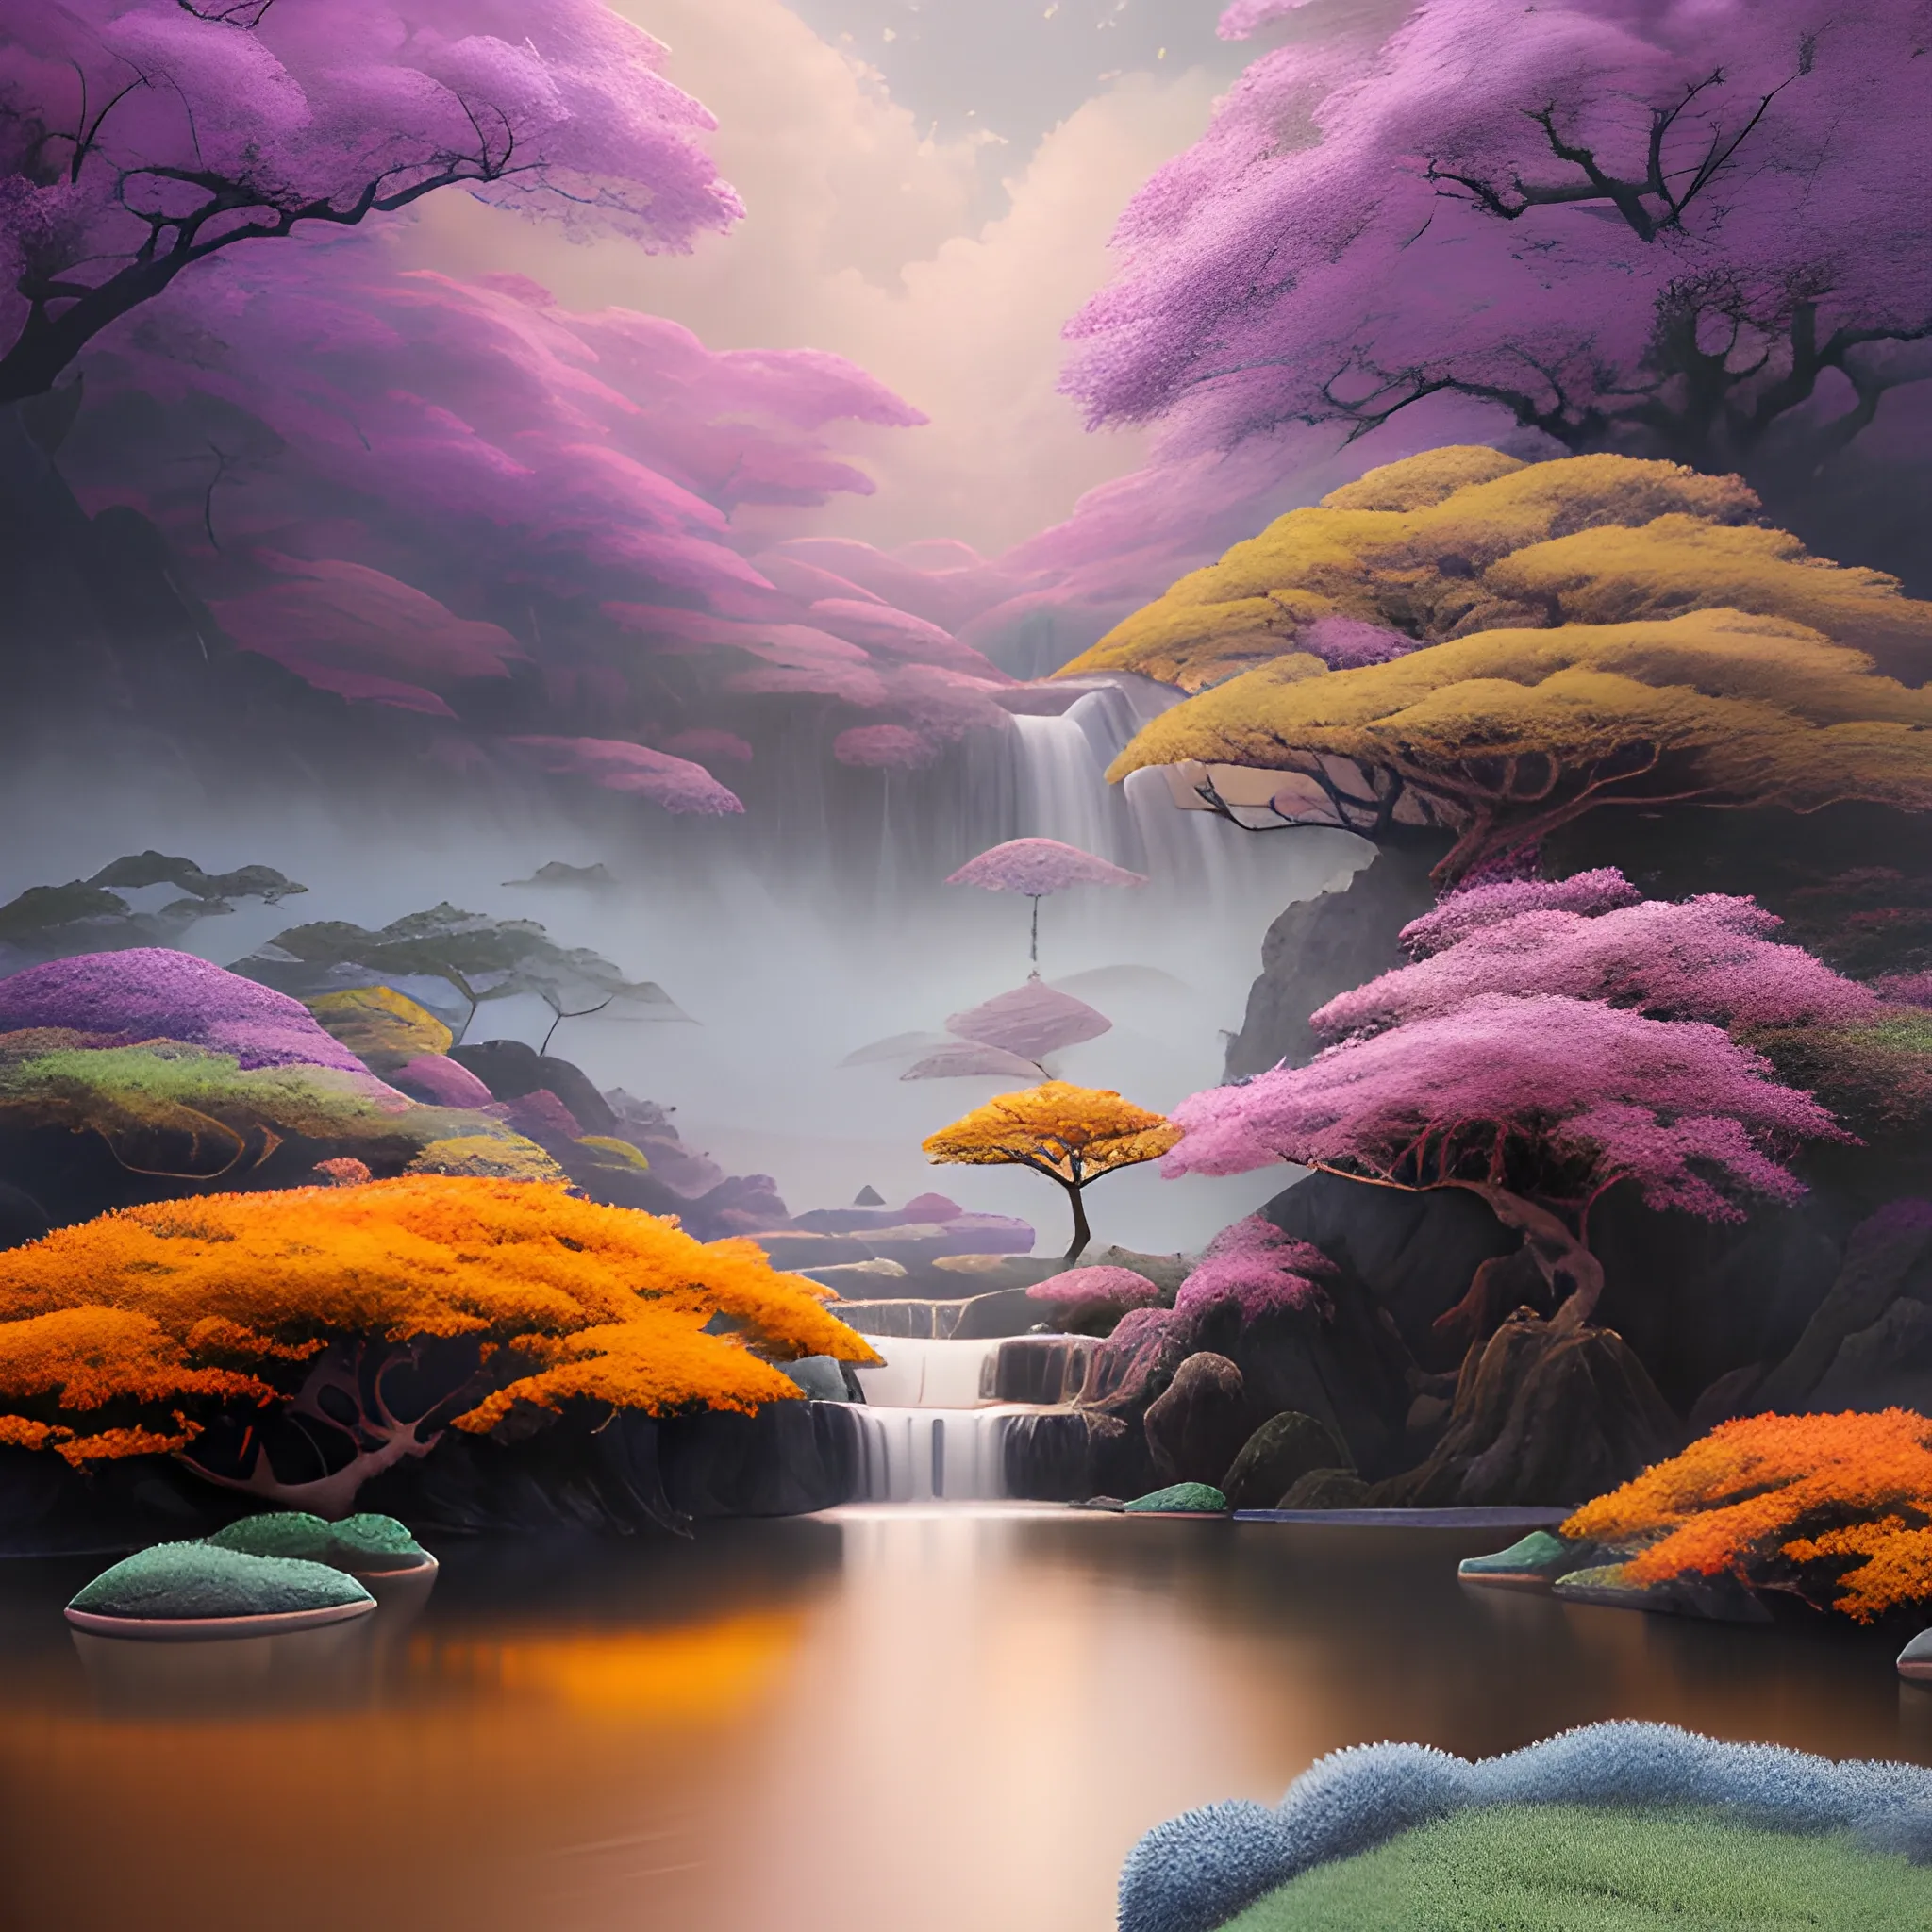 (by Ananta Mandal (and Andrew Biraj:0.5)), (in the style of nihonga), Style: Abstract, Medium: Digital illustration, Subject: A Guanshiyin Pusa standing in the middle of picture, An otherworldly landscape with floating islands, cascading waterfalls, and vibrant flora and fauna. Camera Angle: Overhead shot capturing the vastness and intricate details of the scene. The colors are saturated, and the lighting creates a warm and ethereal atmosphere. The painting is highly detailed, with every brushstroke capturing the complexity of the imaginary world., (high quality), (detailed), (masterpiece), (best quality), (highres), (extremely detailed), (8k), seed:792315689